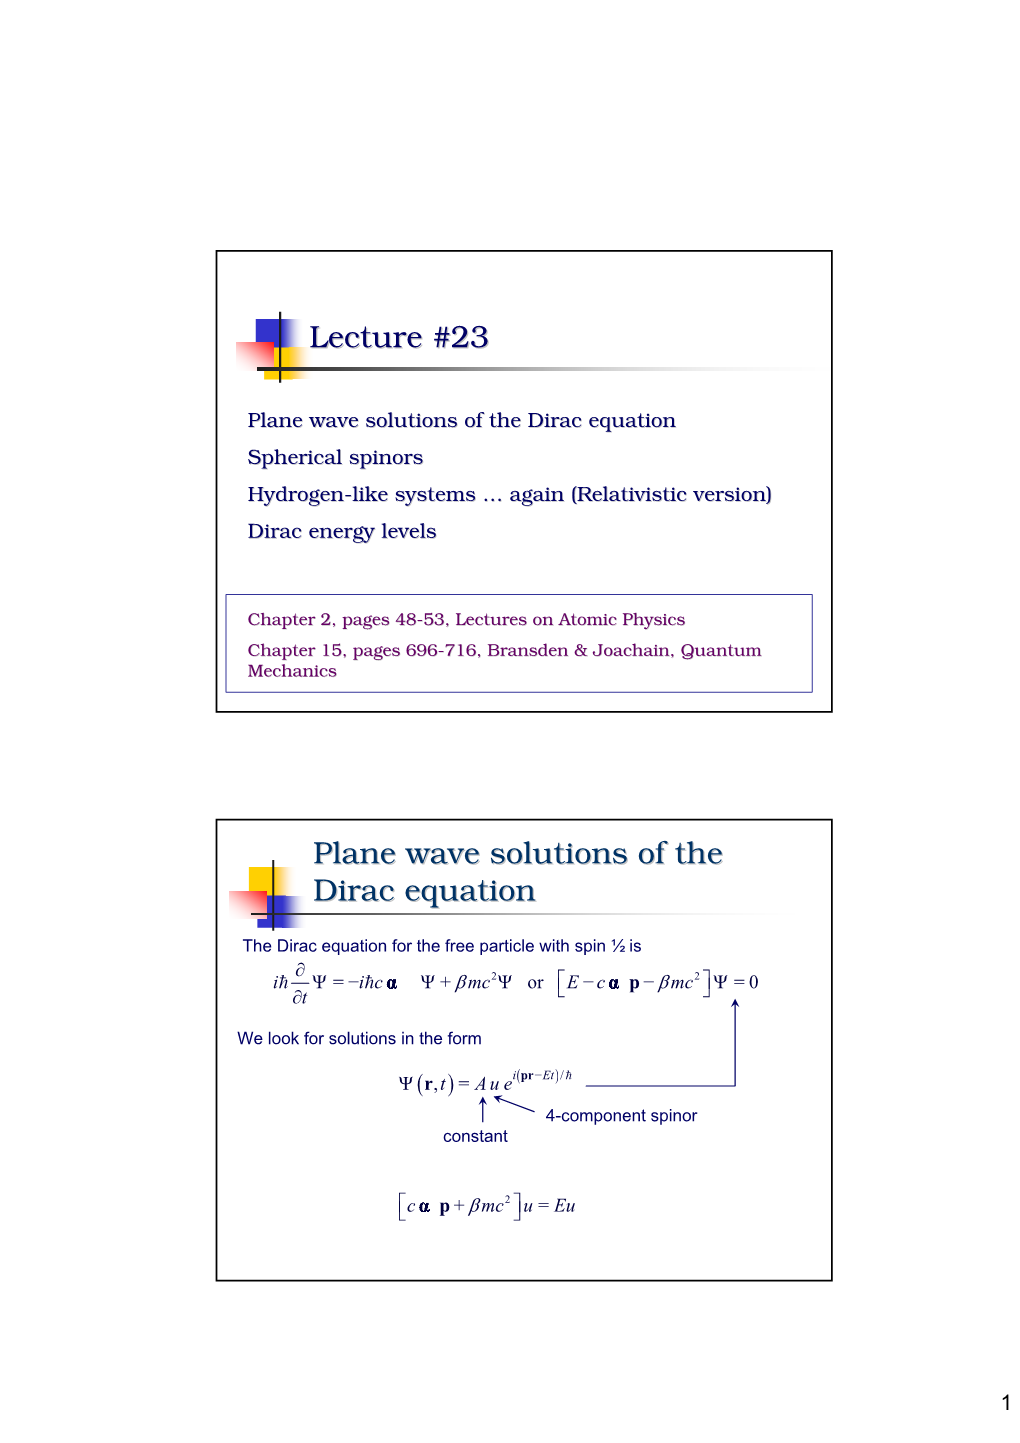 Lecture #23 Plane Wave Solutions of the Dirac Equation